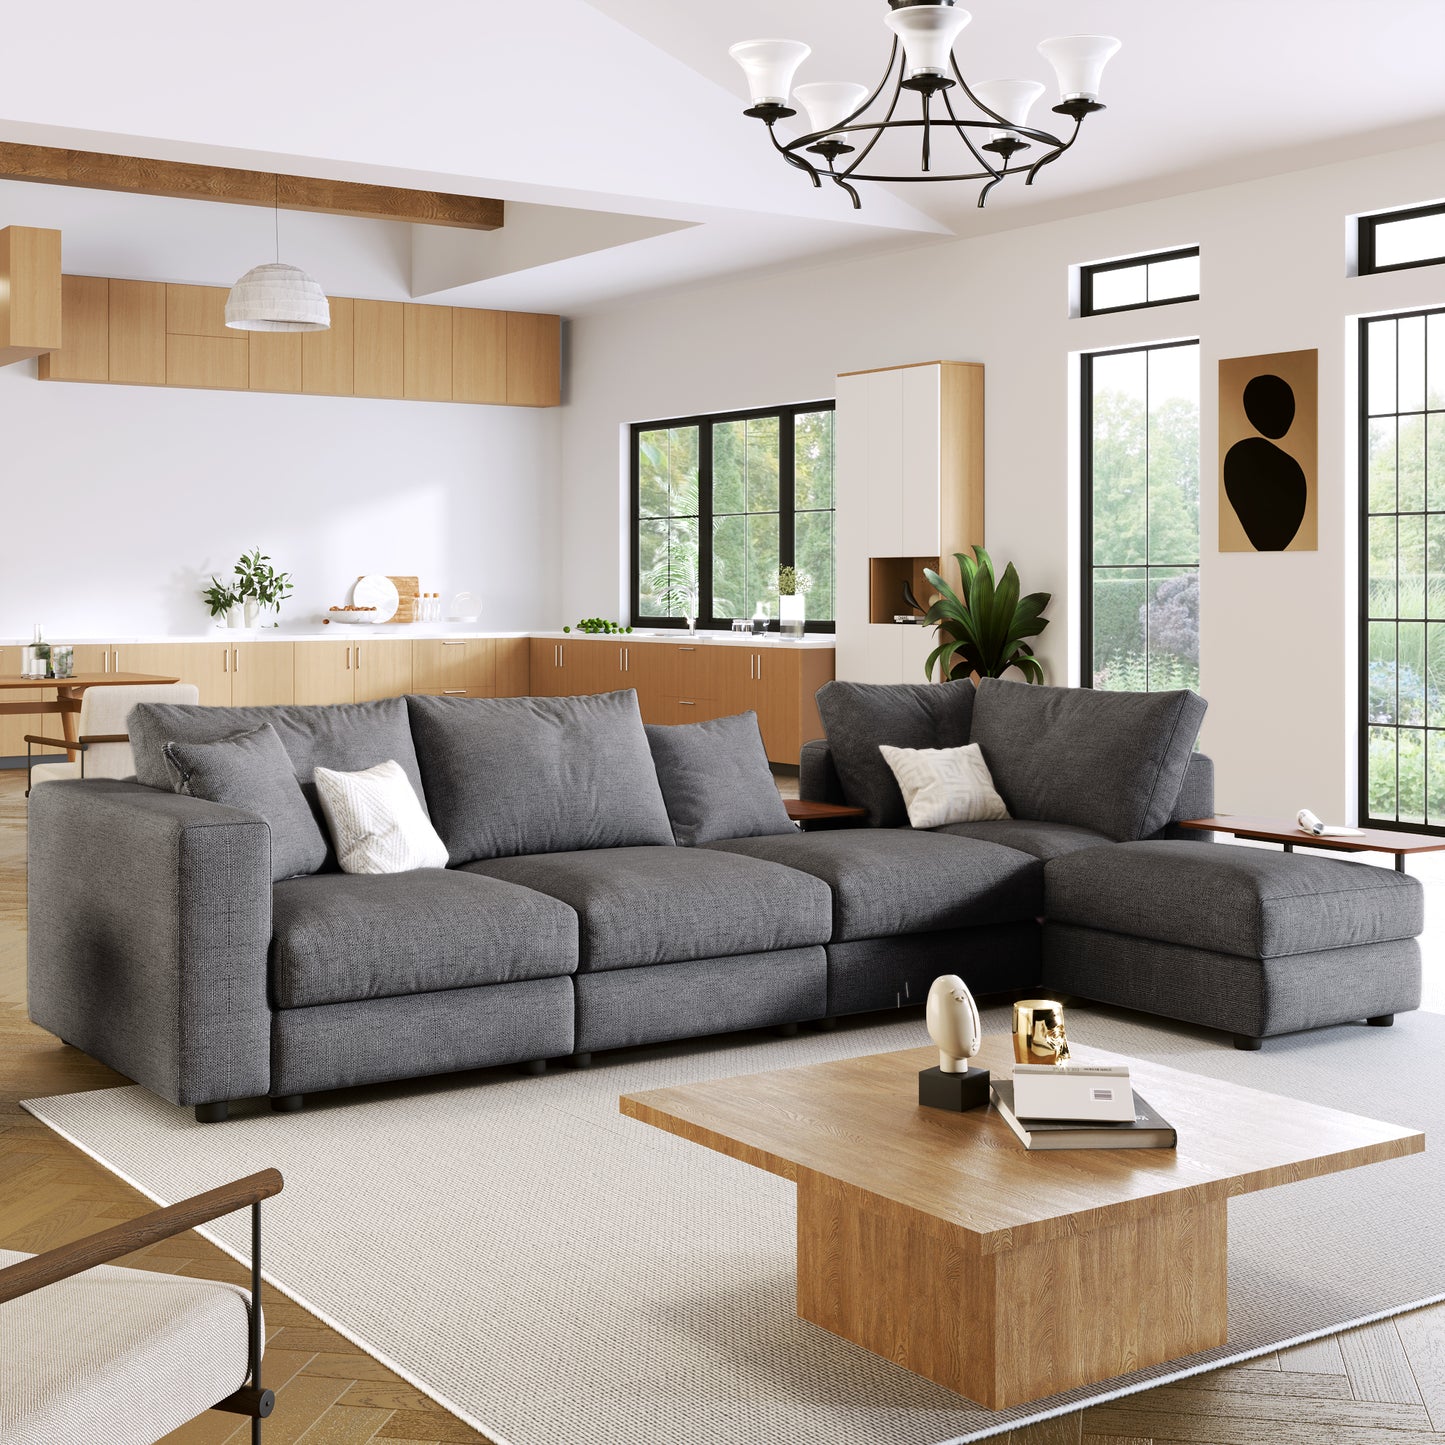 U_STYLE Modern Large L-Shape Sectional Sofa for Living Room, 2 Pillows and 2 End Tables